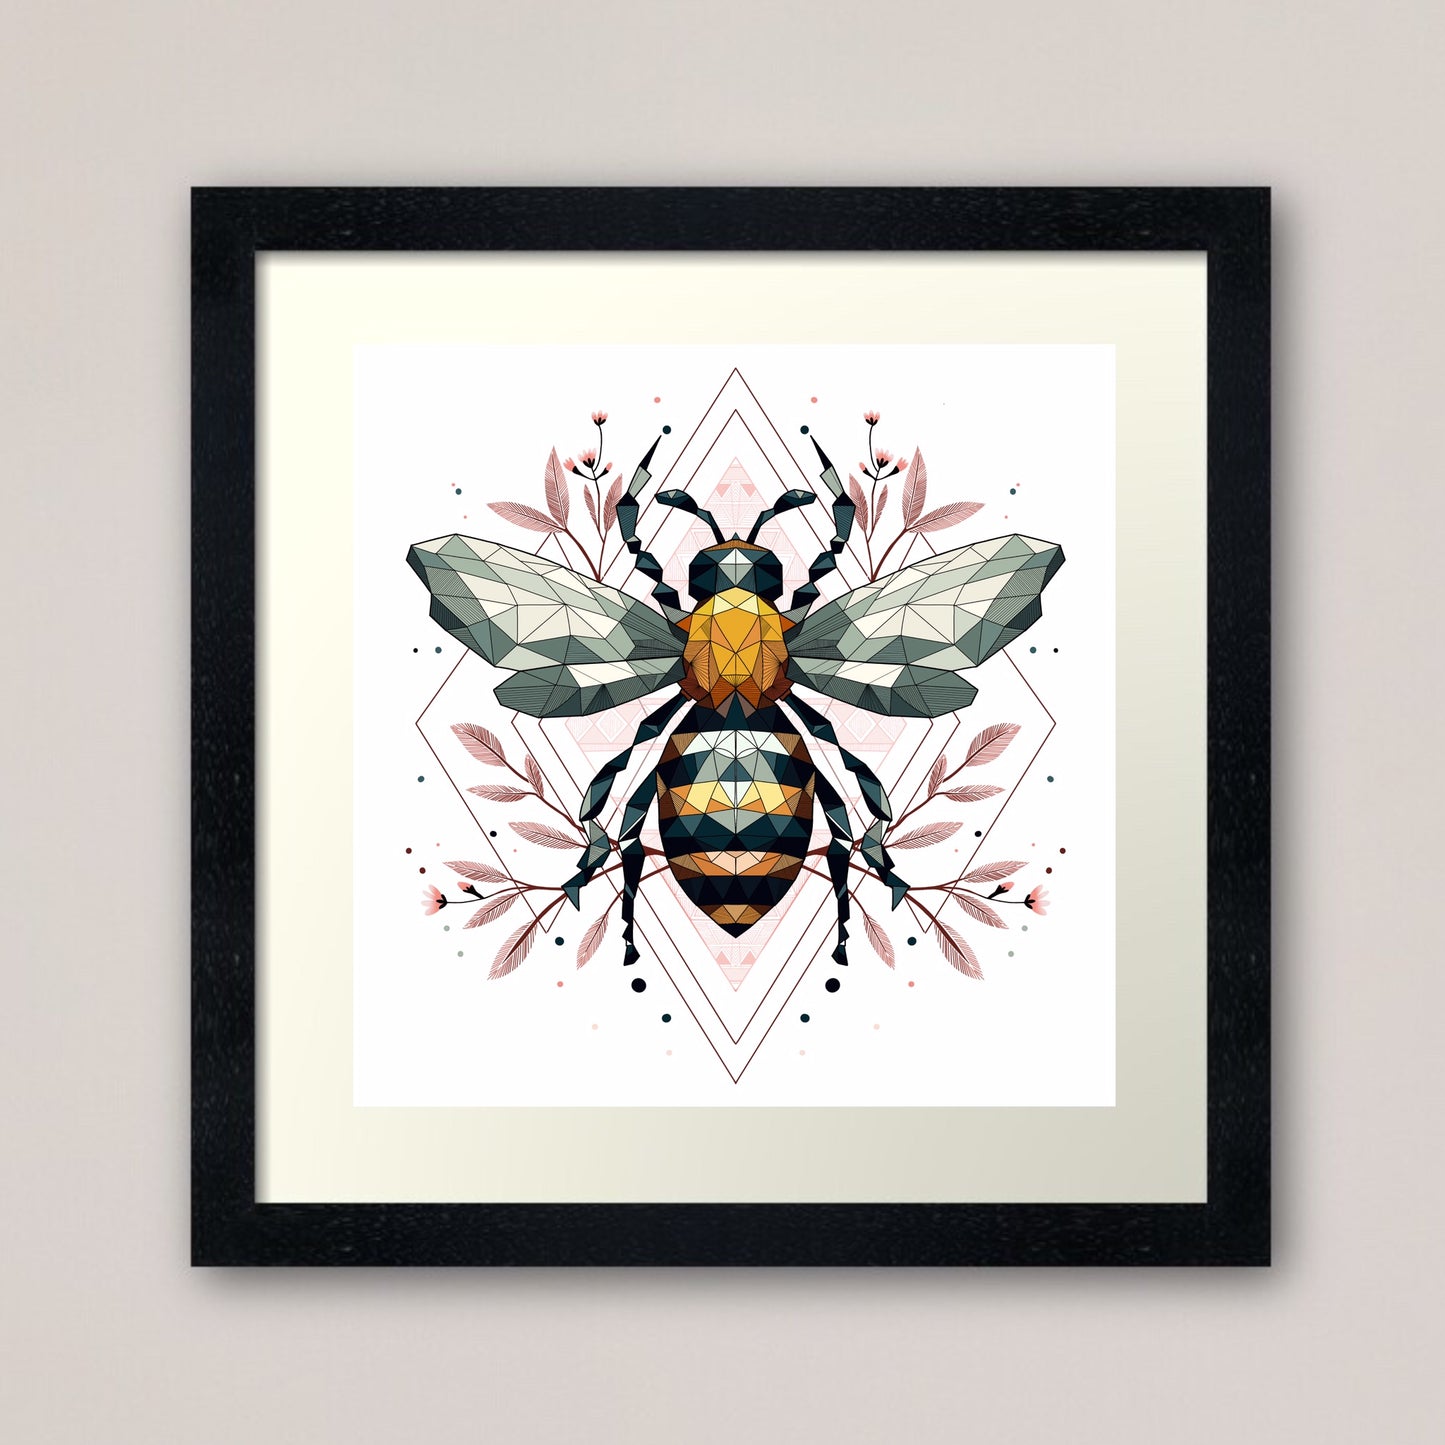 Honeybee in the cherry blossom print - retro geometric zentangle bee insect Illustration nature print/poster